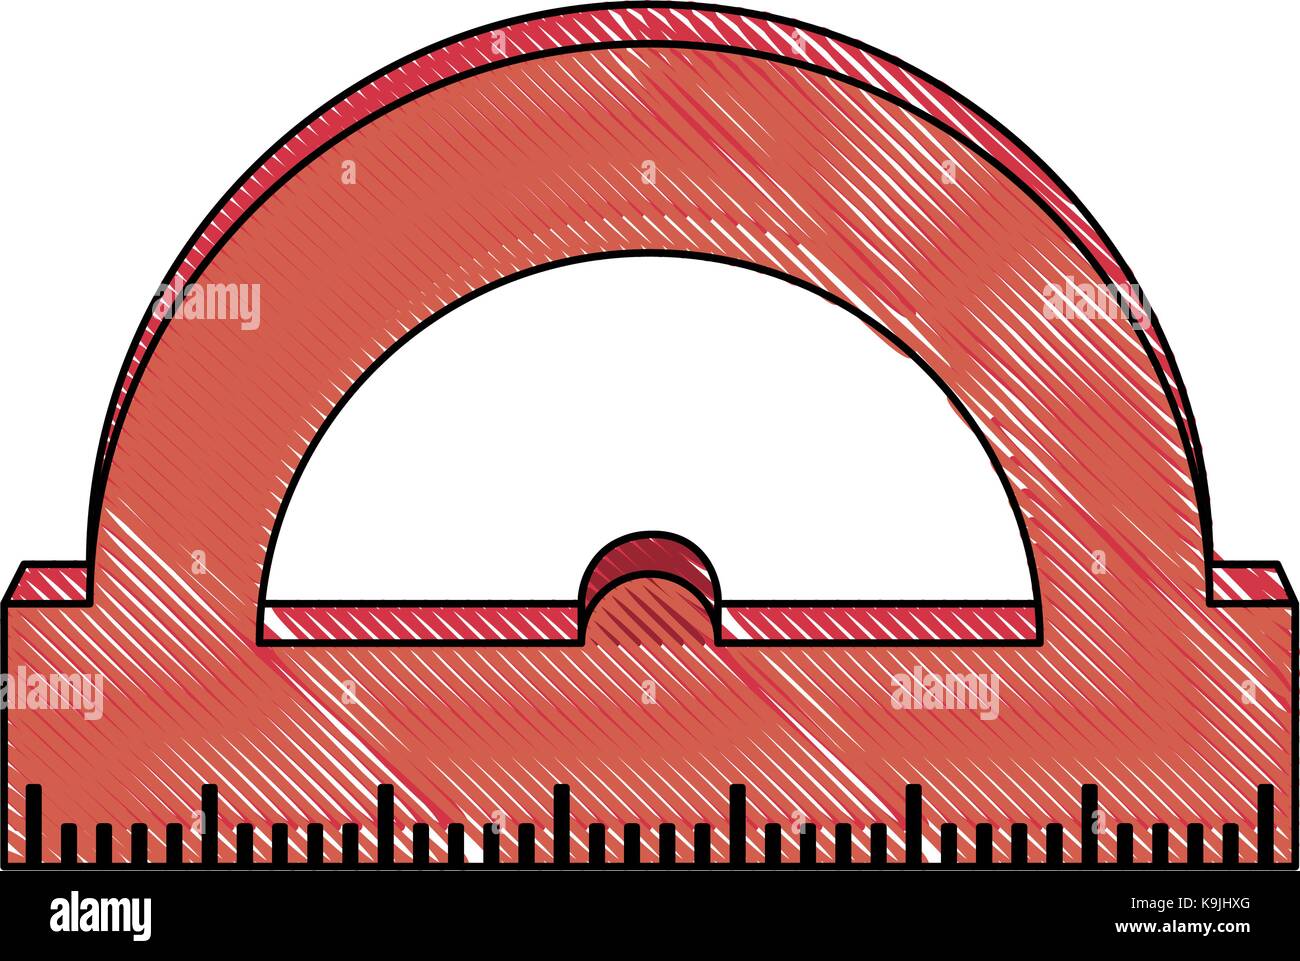 angle meter ruler Stock Vector